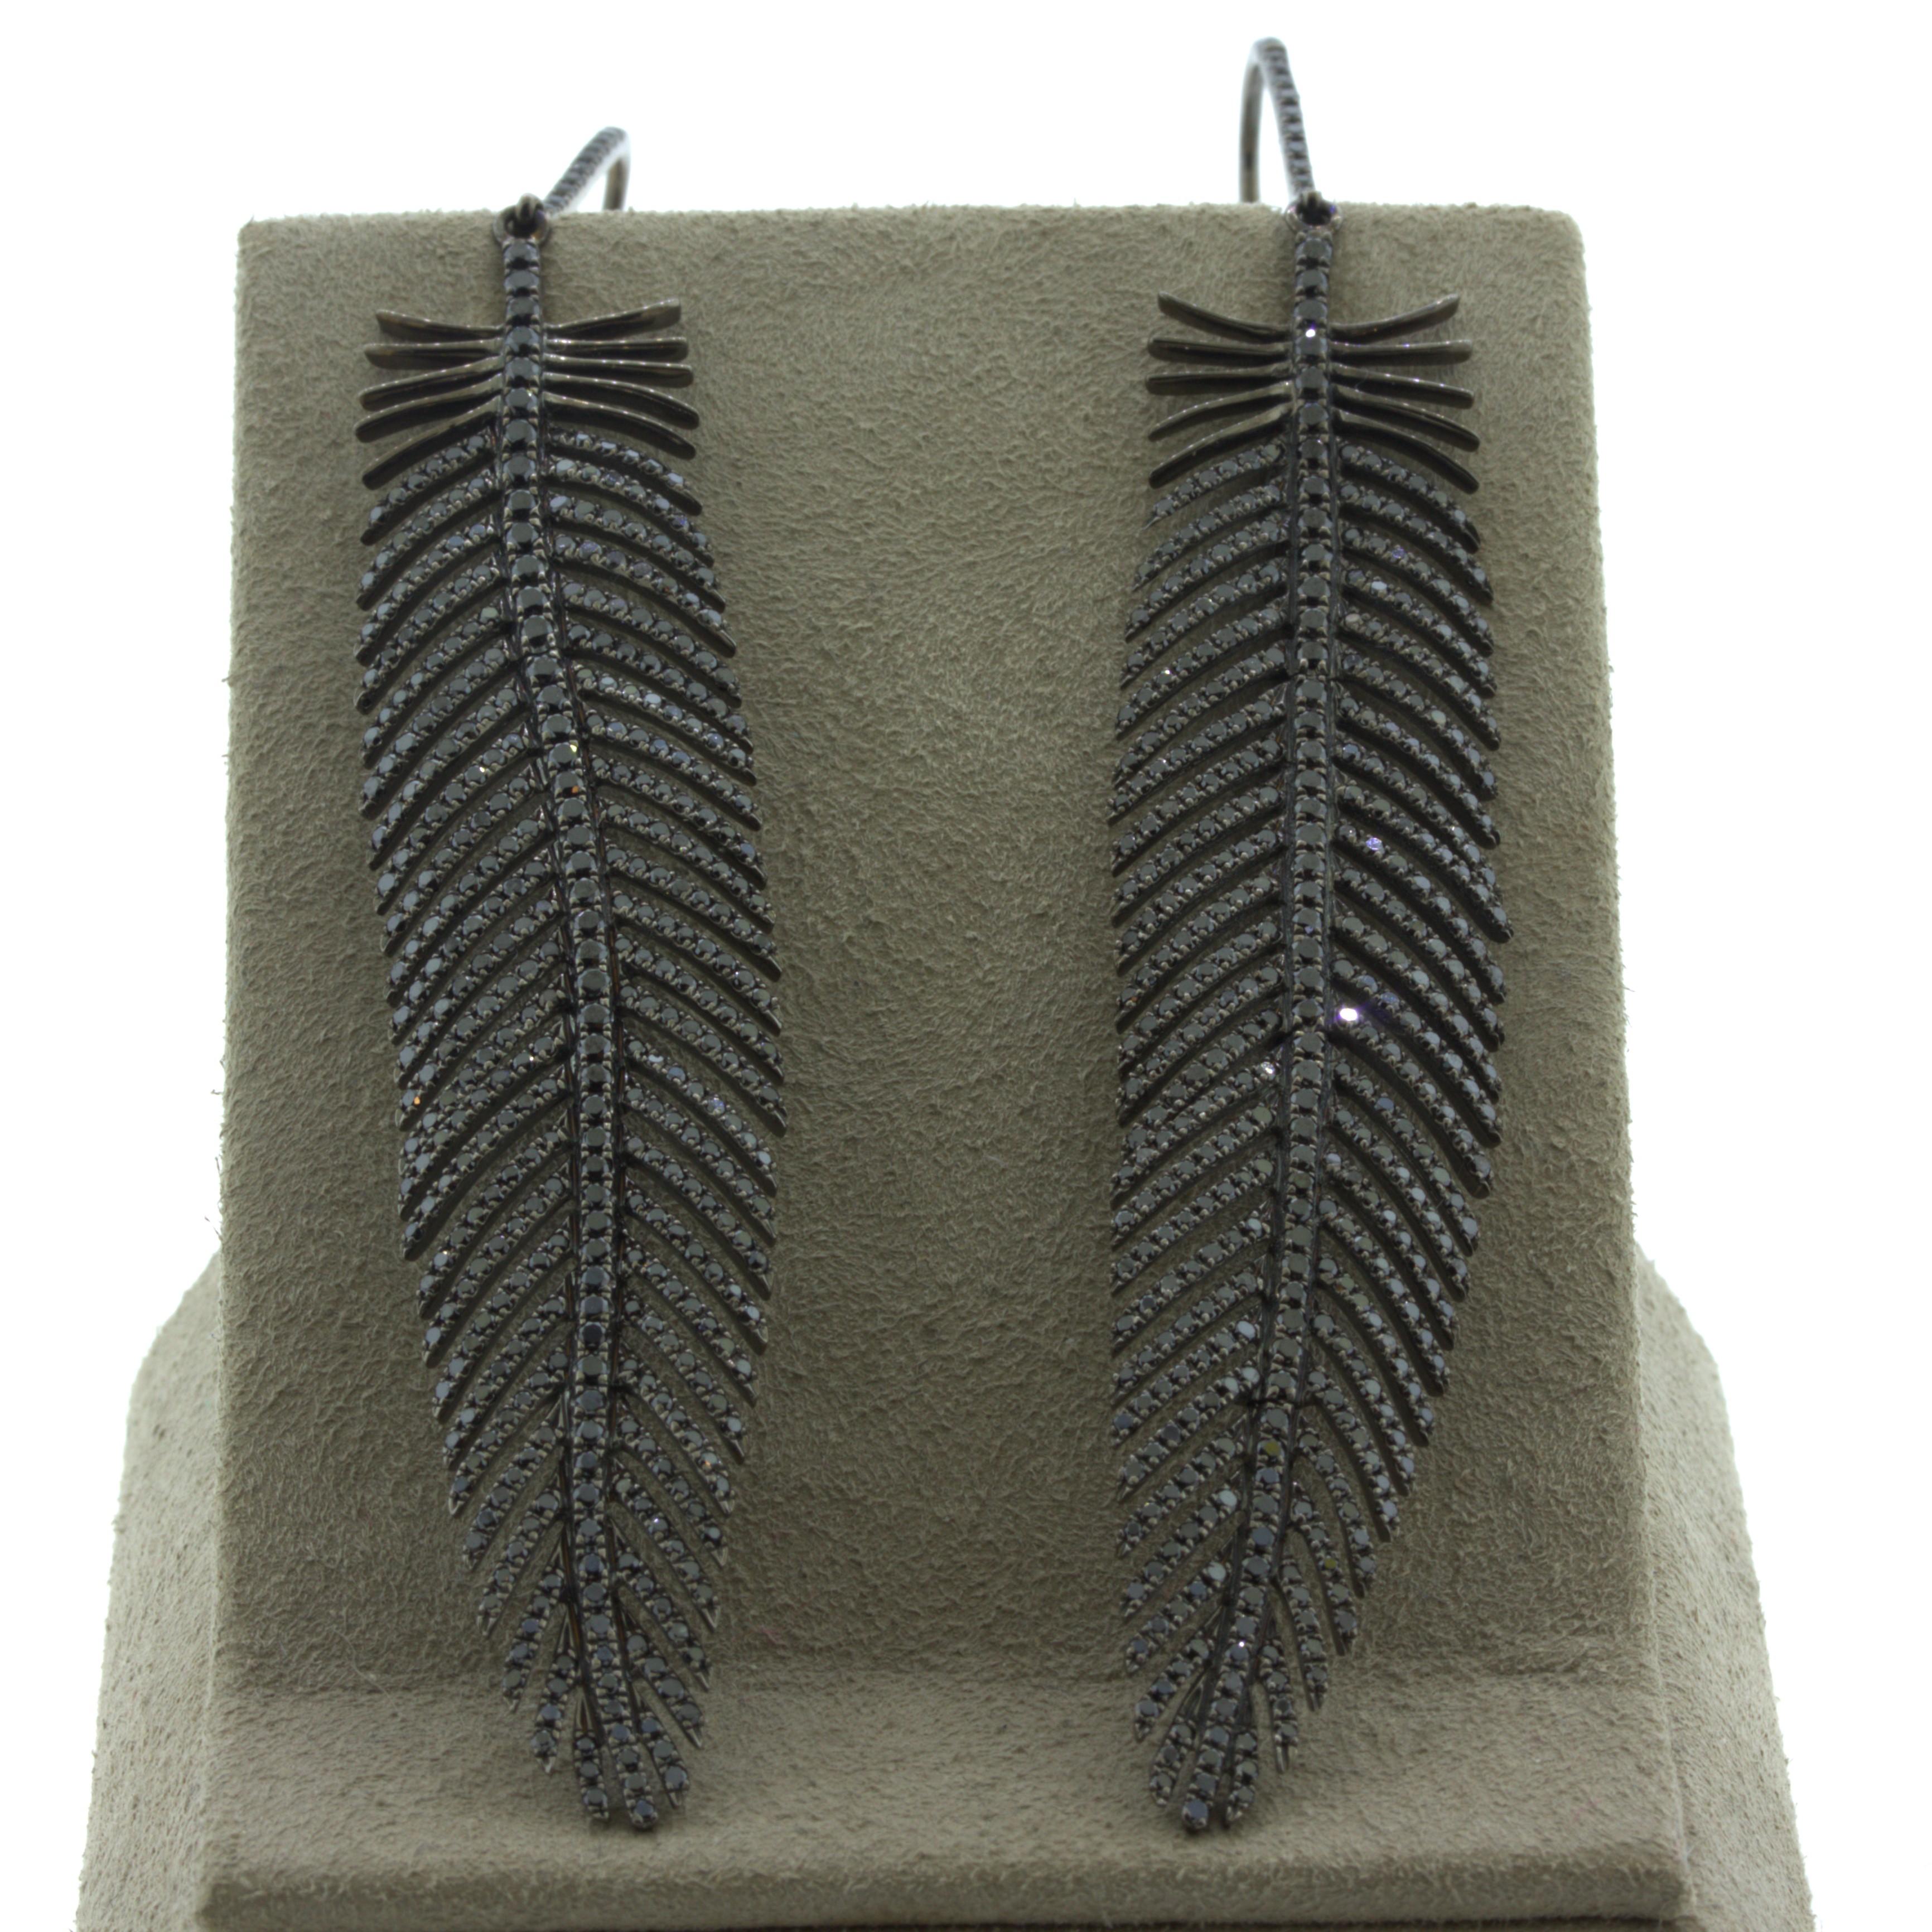 Black Diamond 18k Gold Feather Earrings

A long and delicate pair of feather earrings made in 18k gold with a rhodium plating giving the piece a black metallic look. They are set with 3.77 carats of round brilliant-cut black diamonds which sparkle